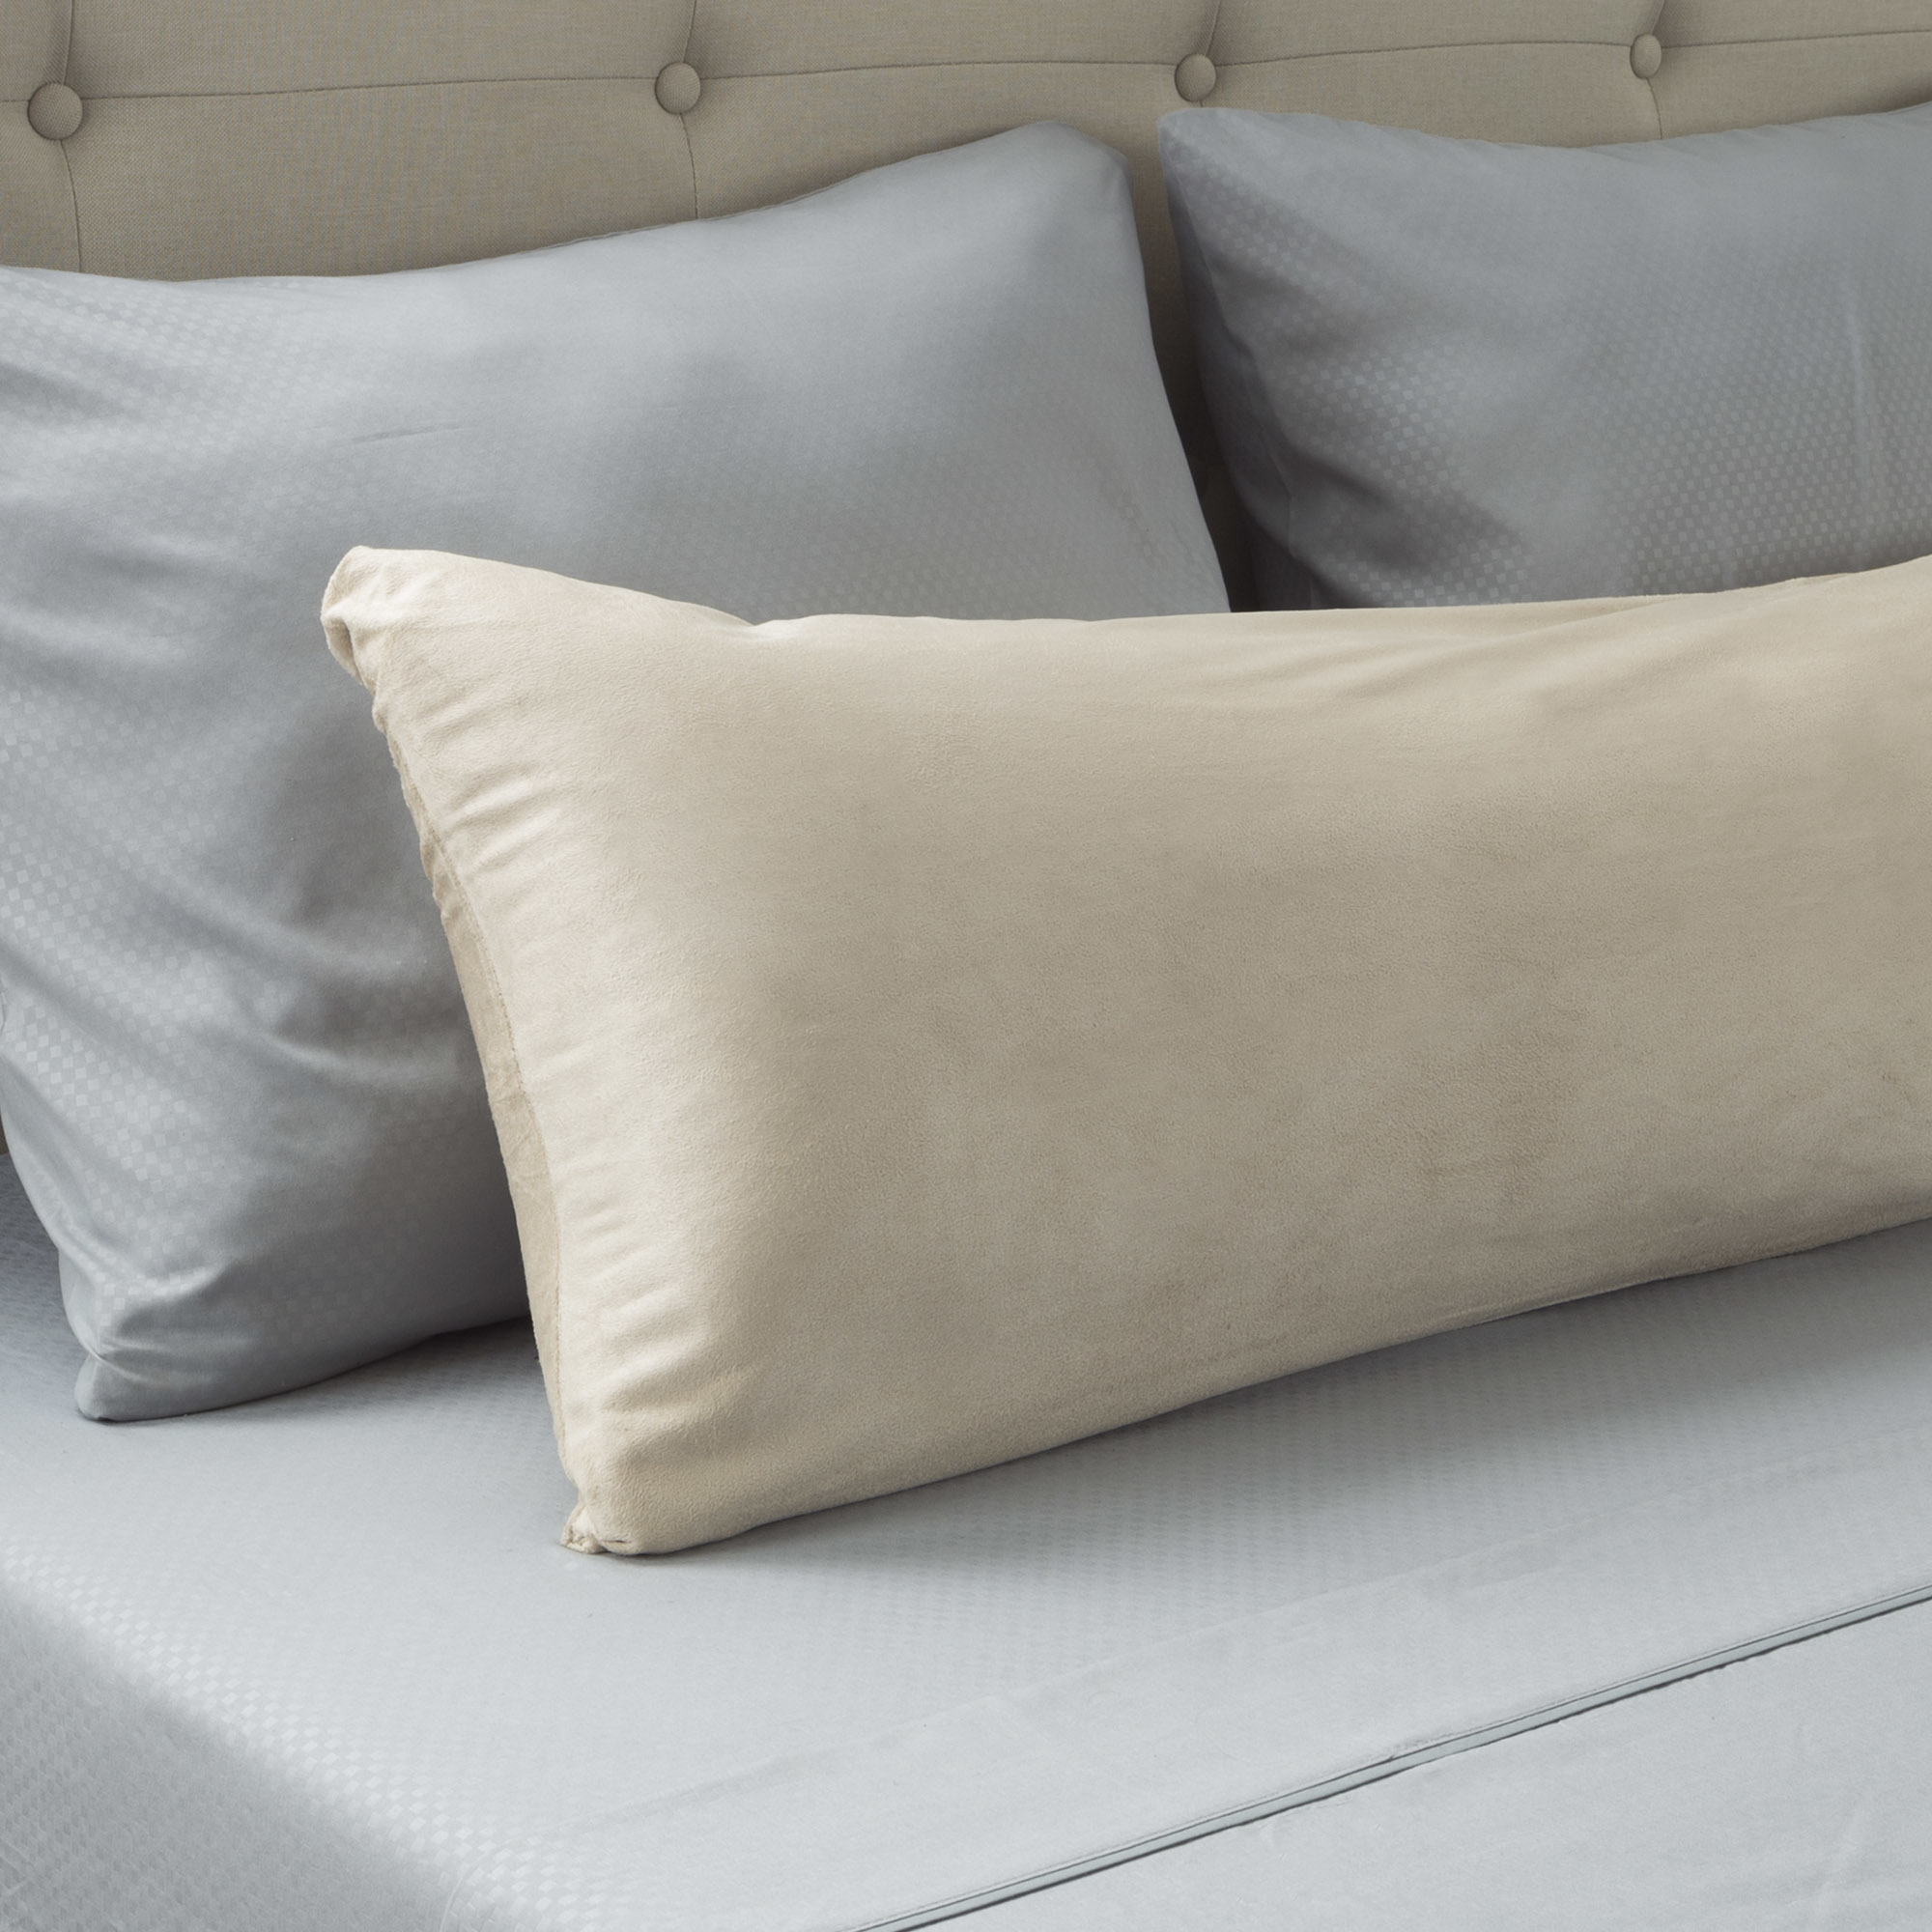 Microsuede Body Pillow Cover Pillowcase Zippered Washable 51 X 17 Inches Cream